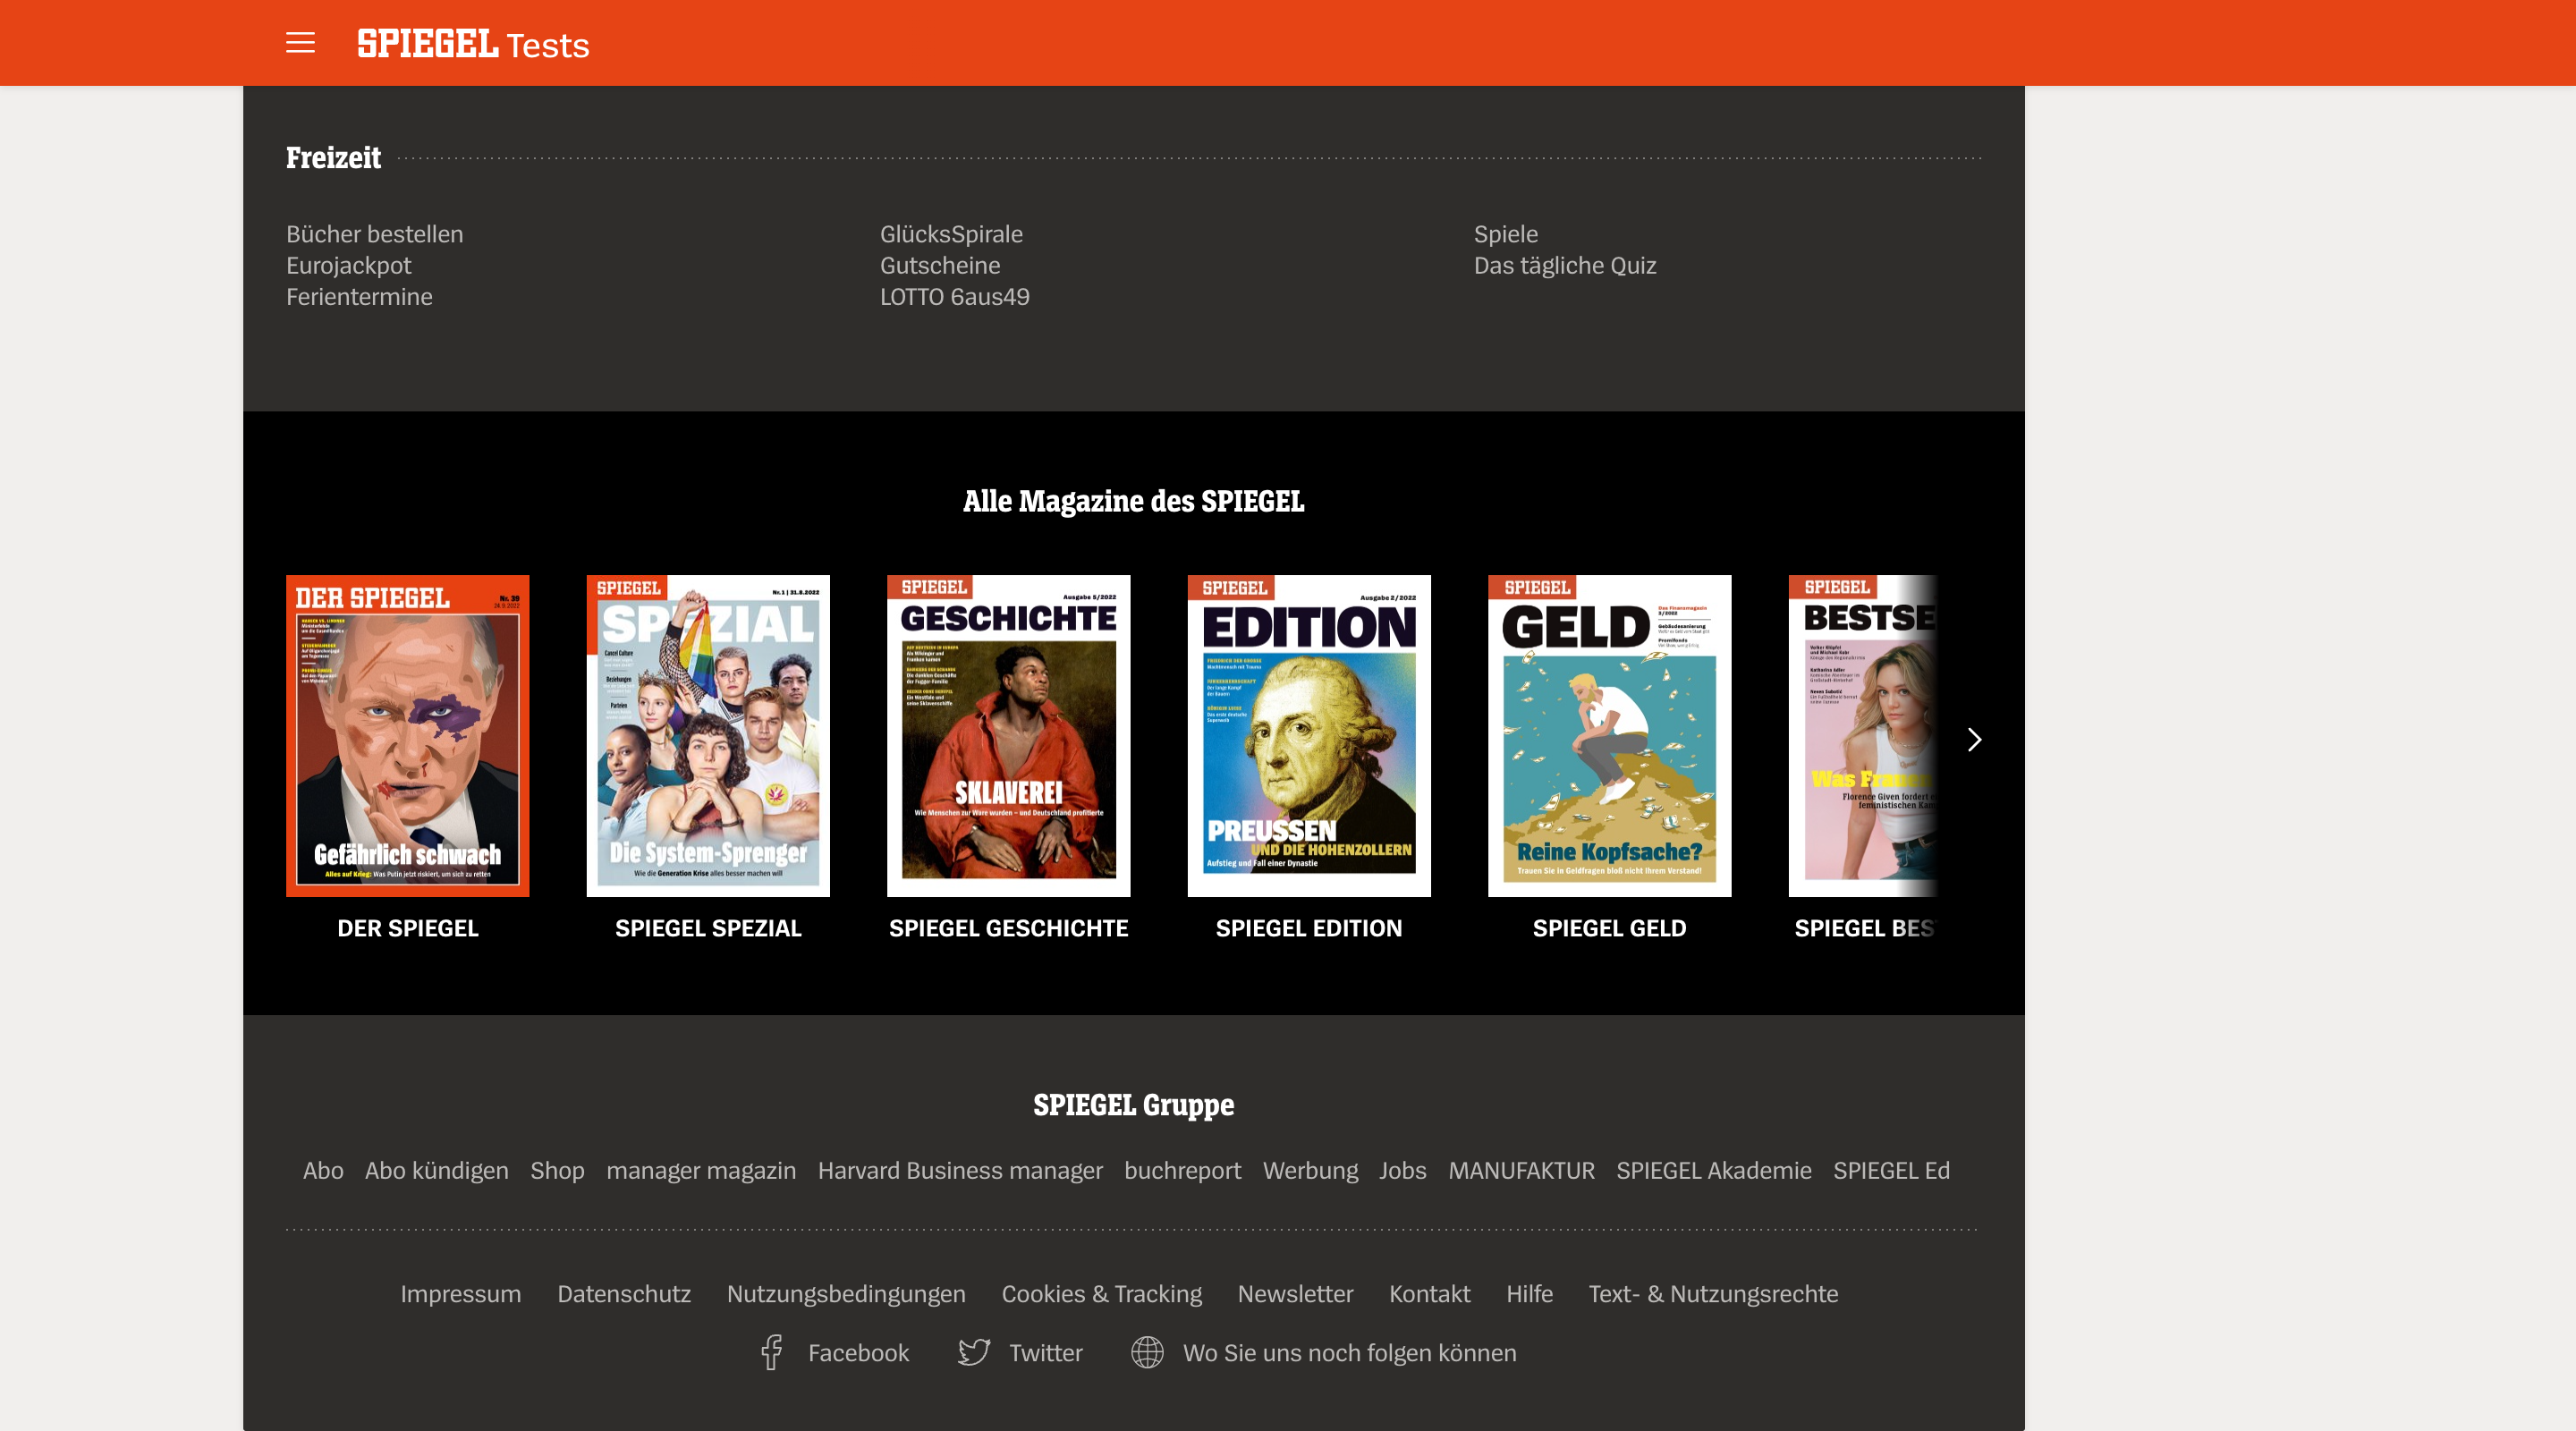 Screenshot of the Der Spiegel website footer. The header contains a menu button and the Spiegel logo. Below that there is a row of magazine cover images that extend off screen. At the bottom of the screen there is a list of page links followed by social media links.